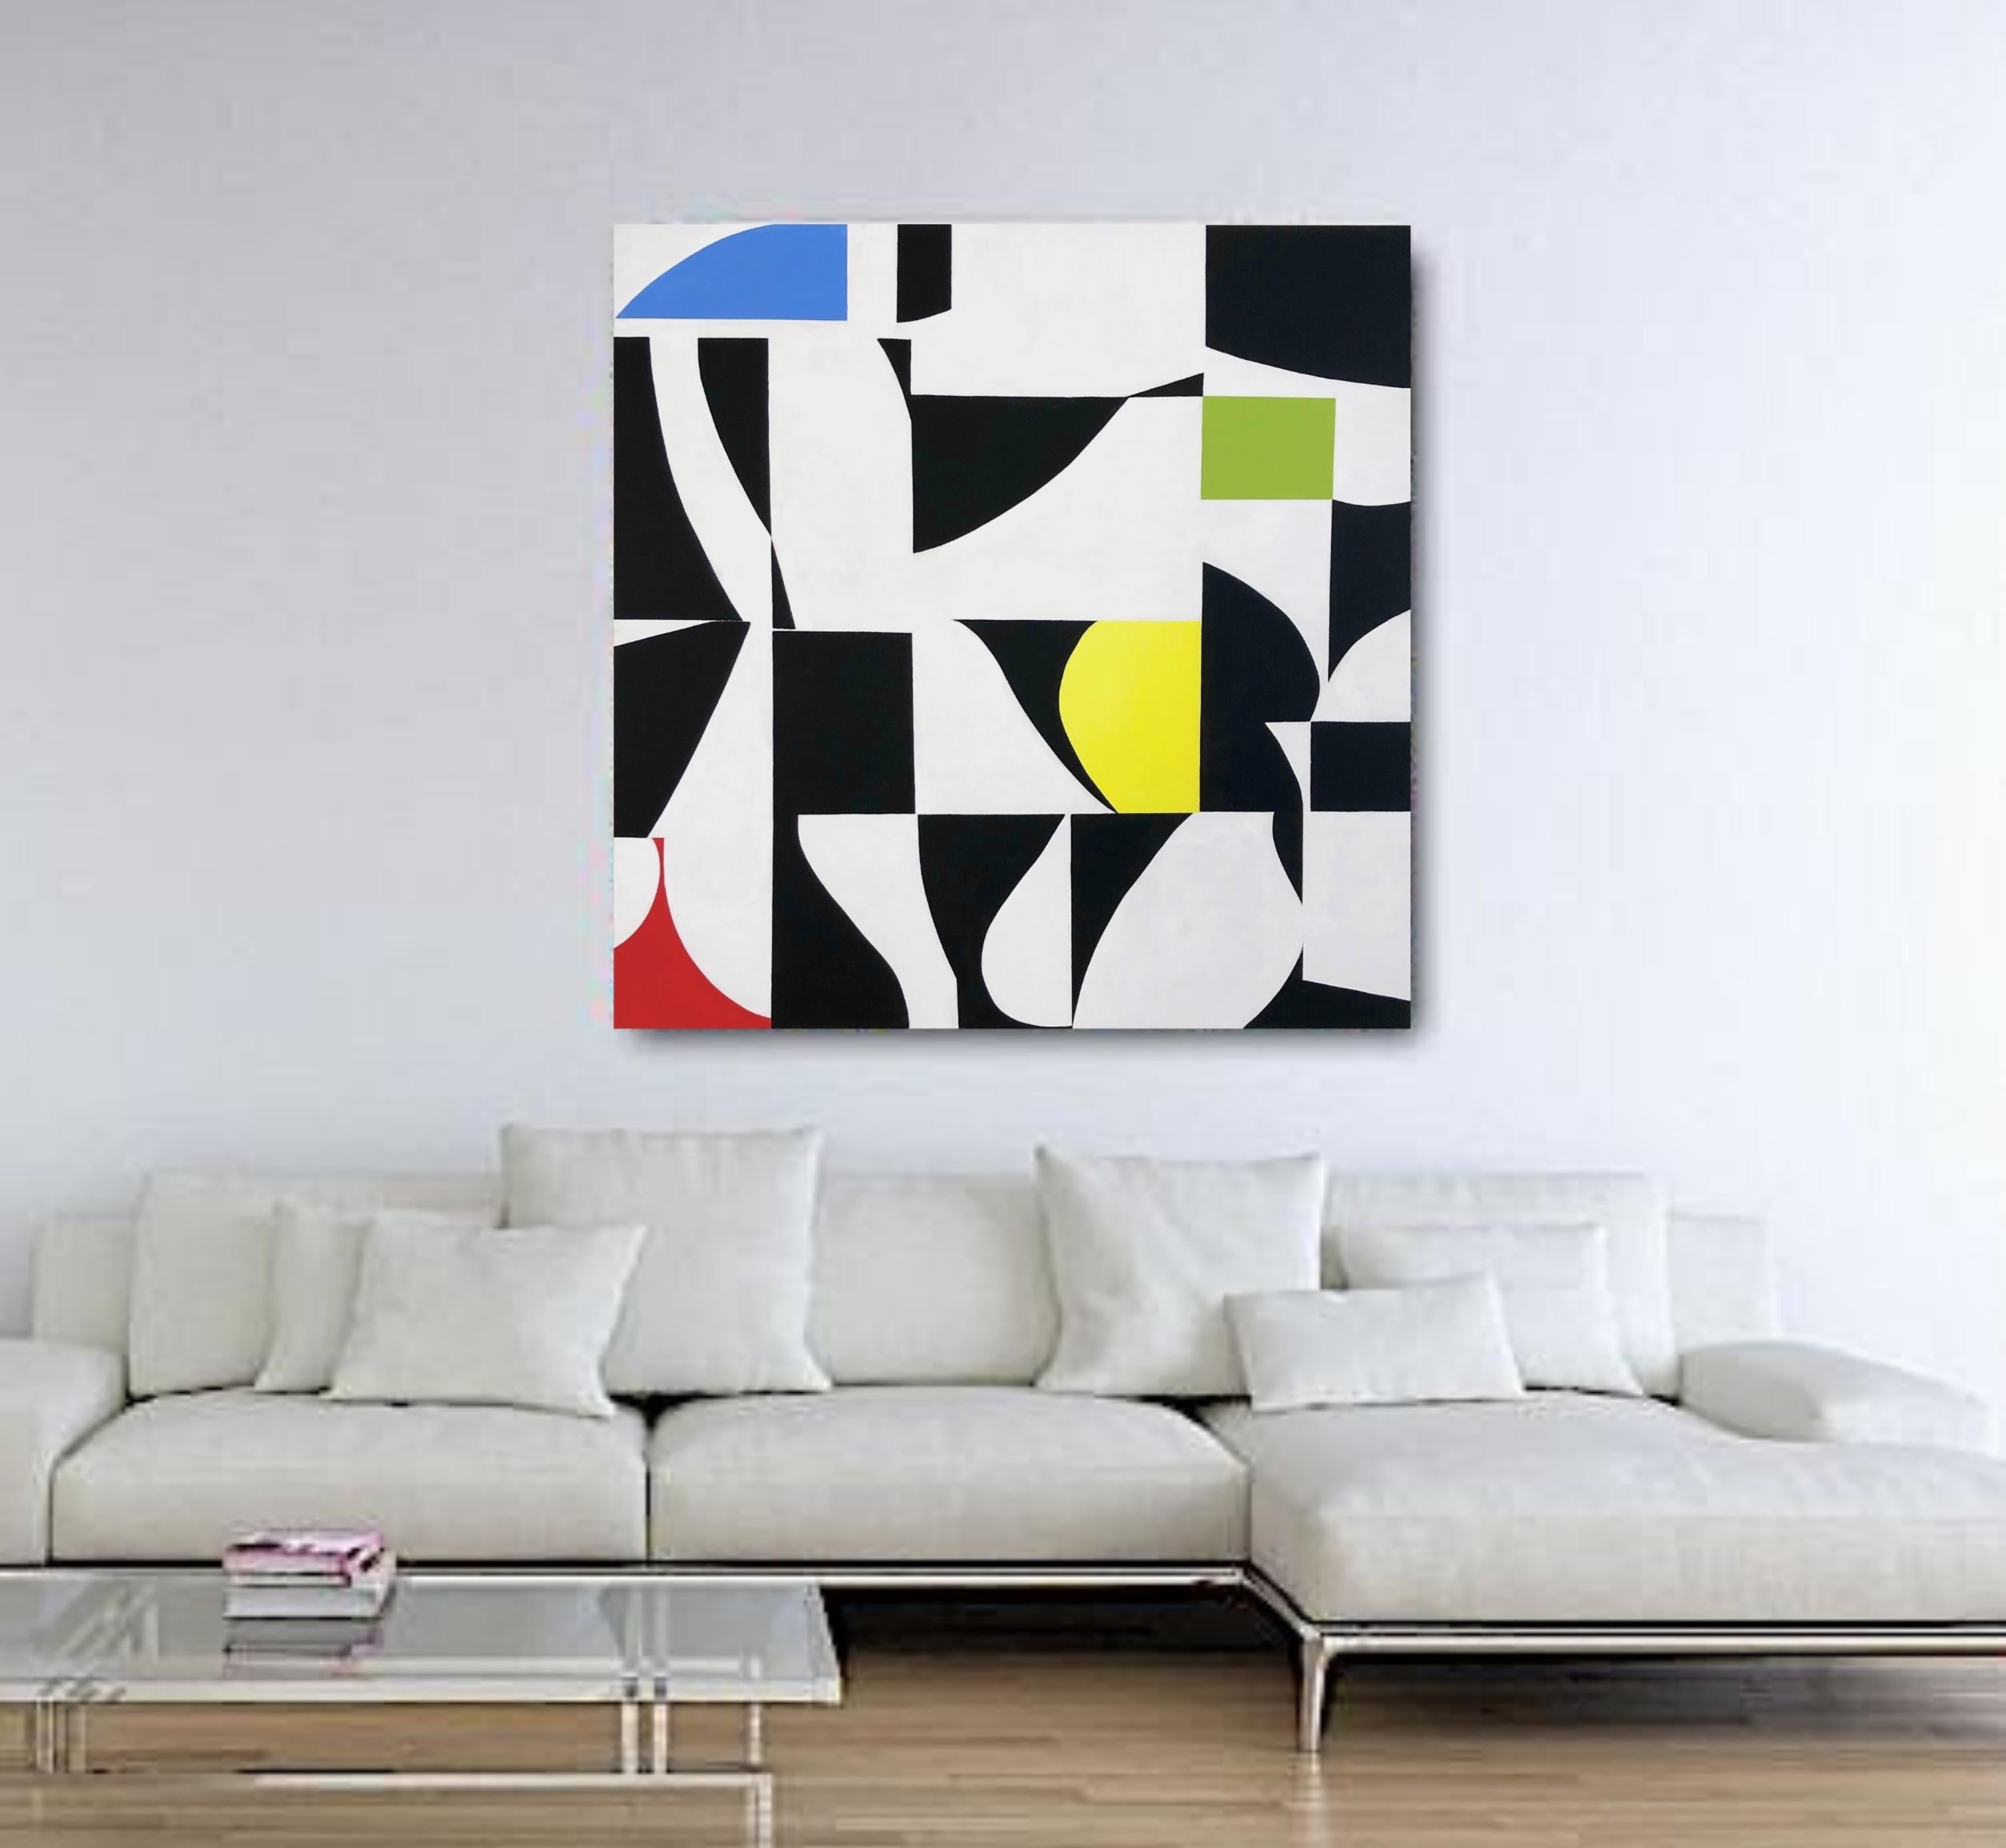 Geometric Abstraction 45 - Beige Abstract Painting by Anna Medvedeva